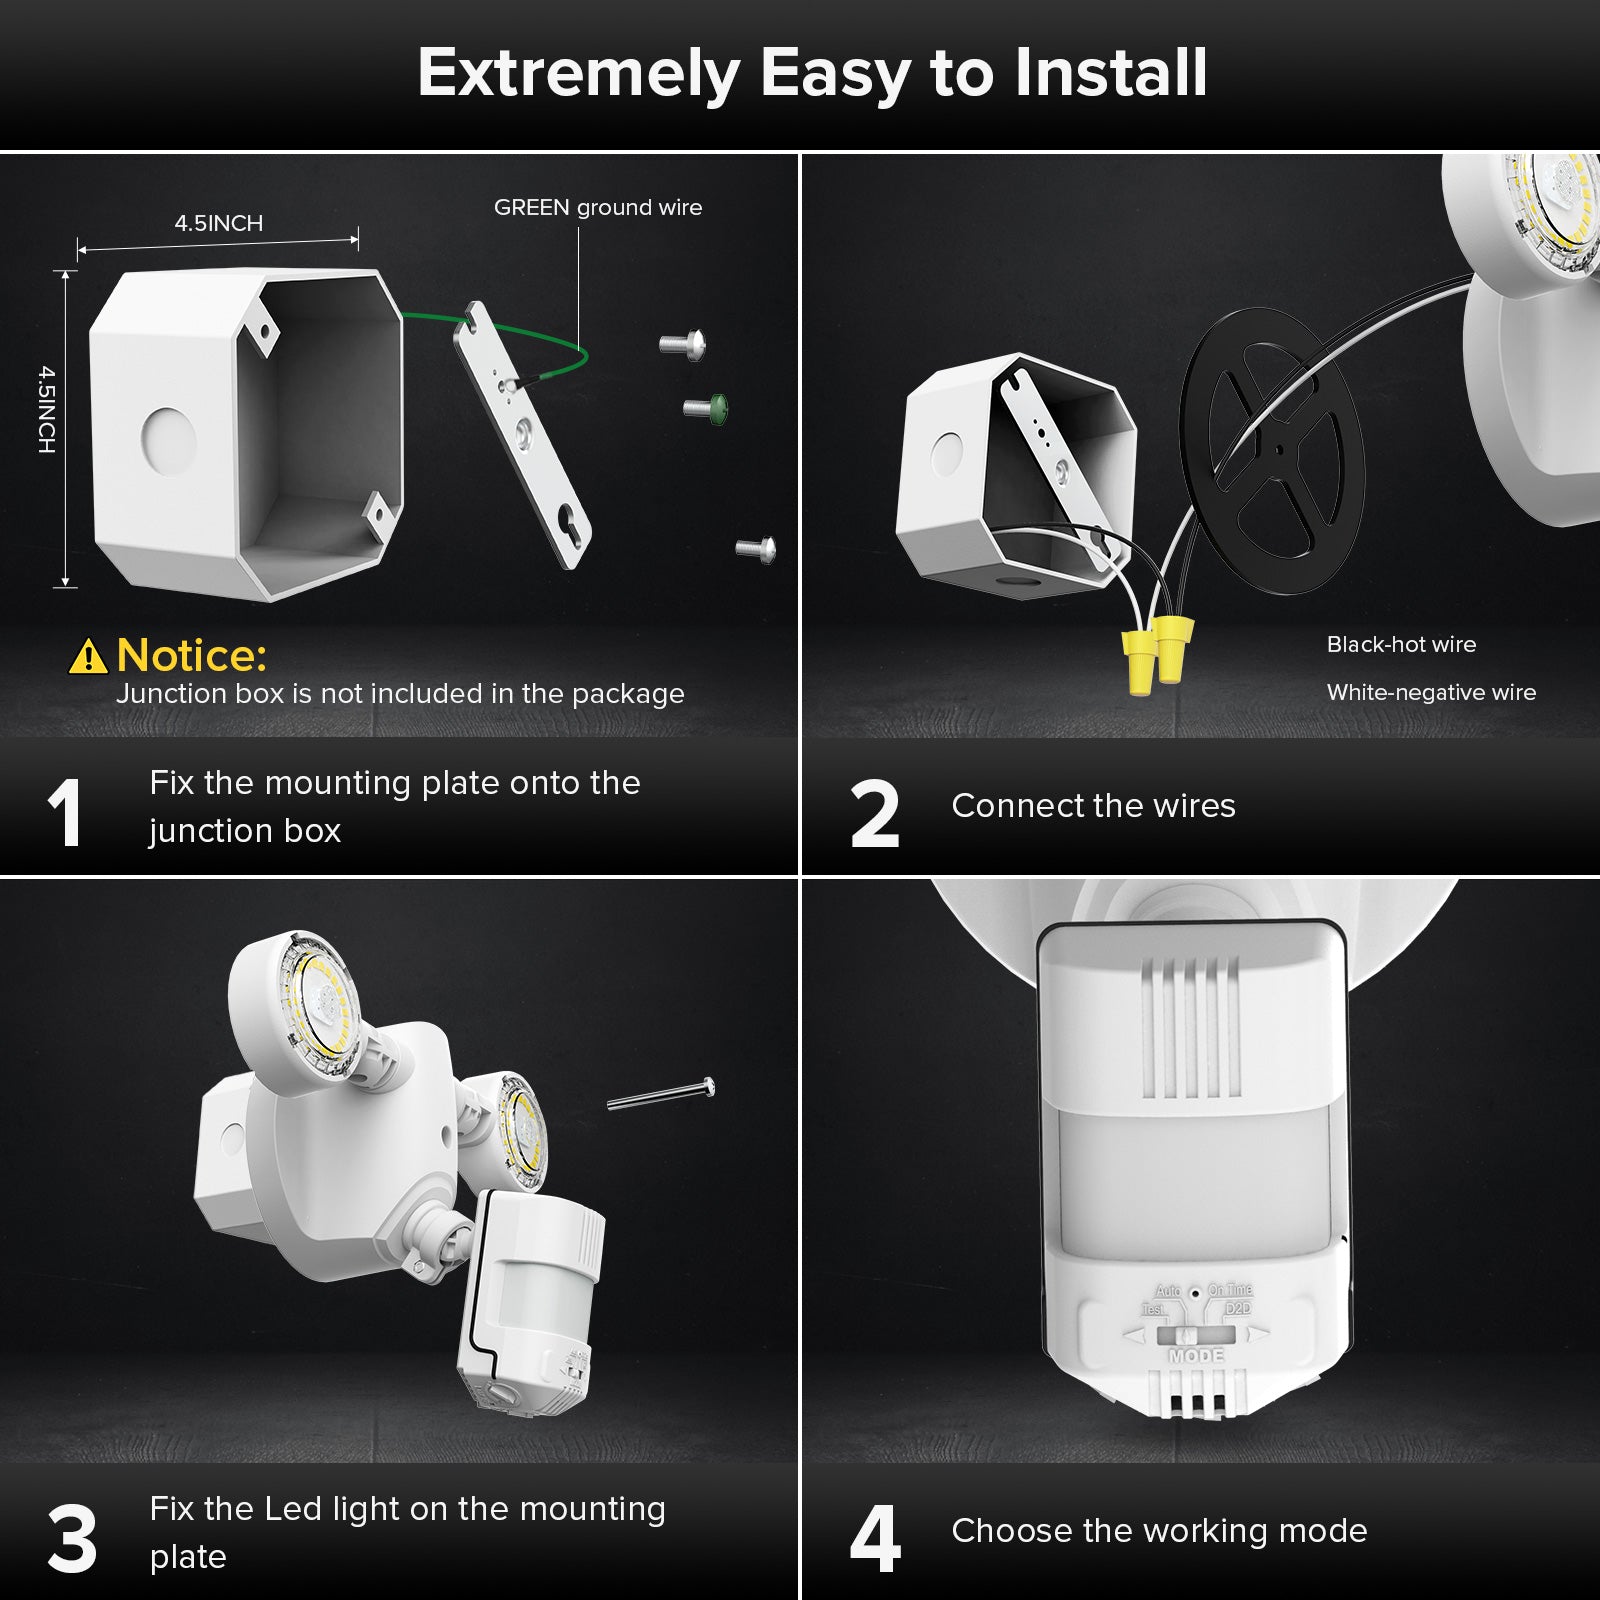 15W LED Security Light (Dusk to Dawn & Motion Sensor) is extremely easy to install